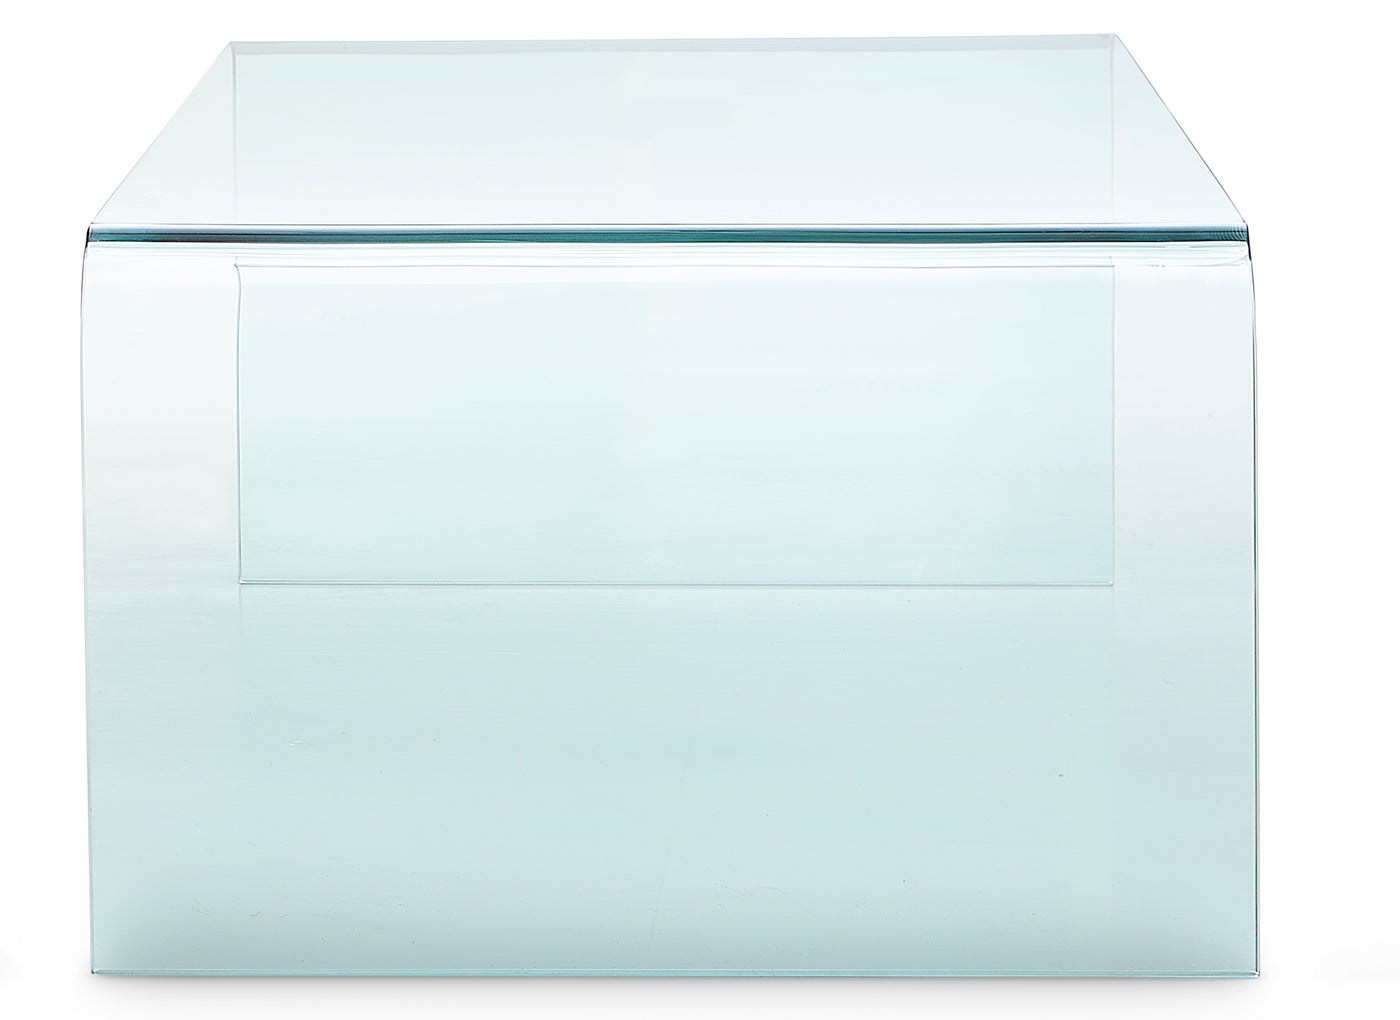 Flow Coffee Table - Glass